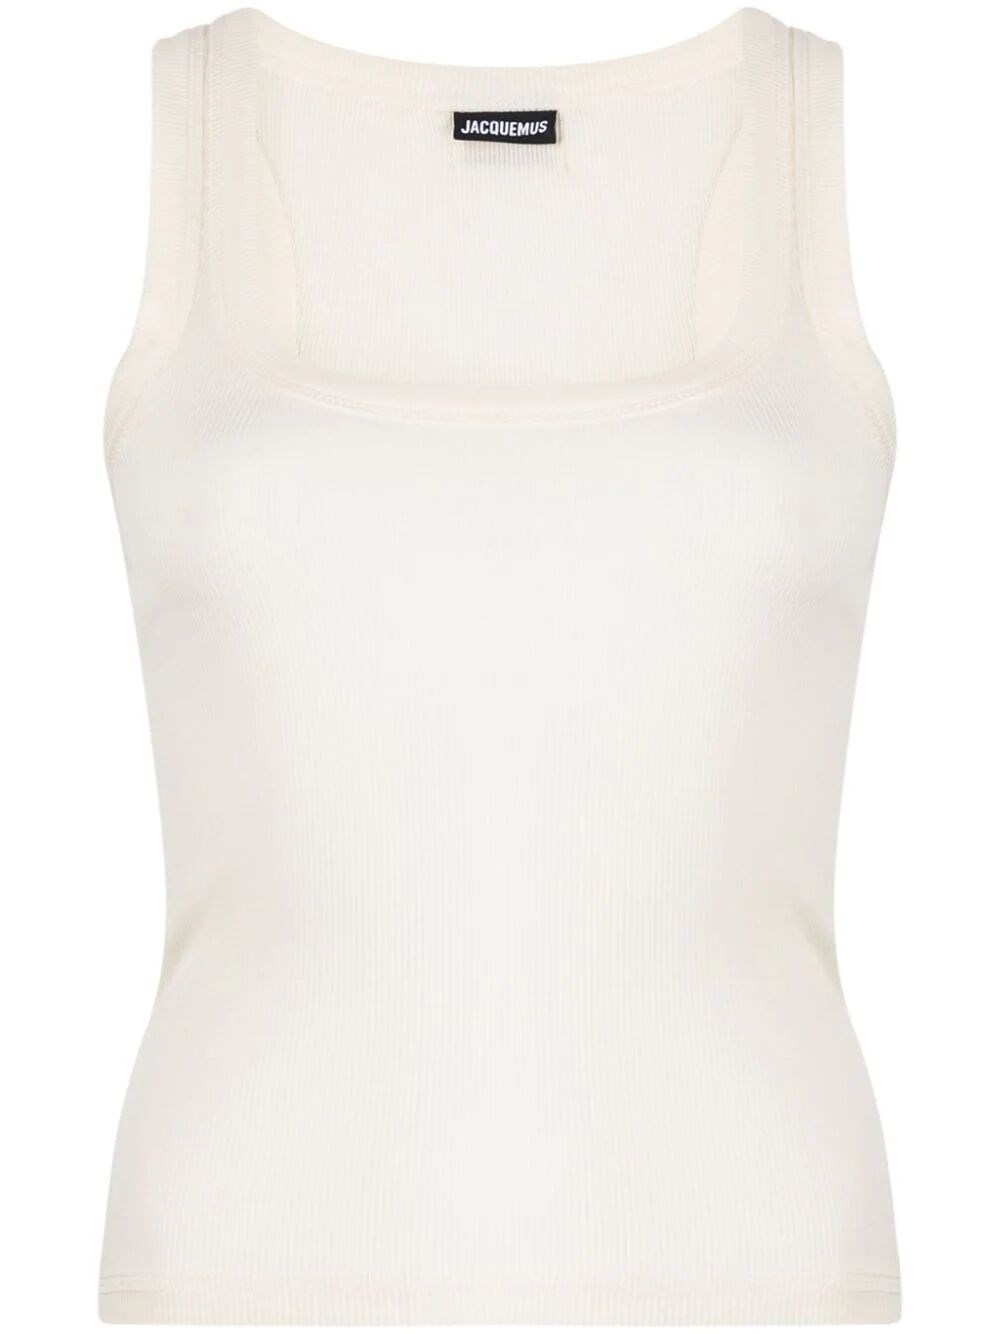 Shop Jacquemus Second Skin Tank Top In White